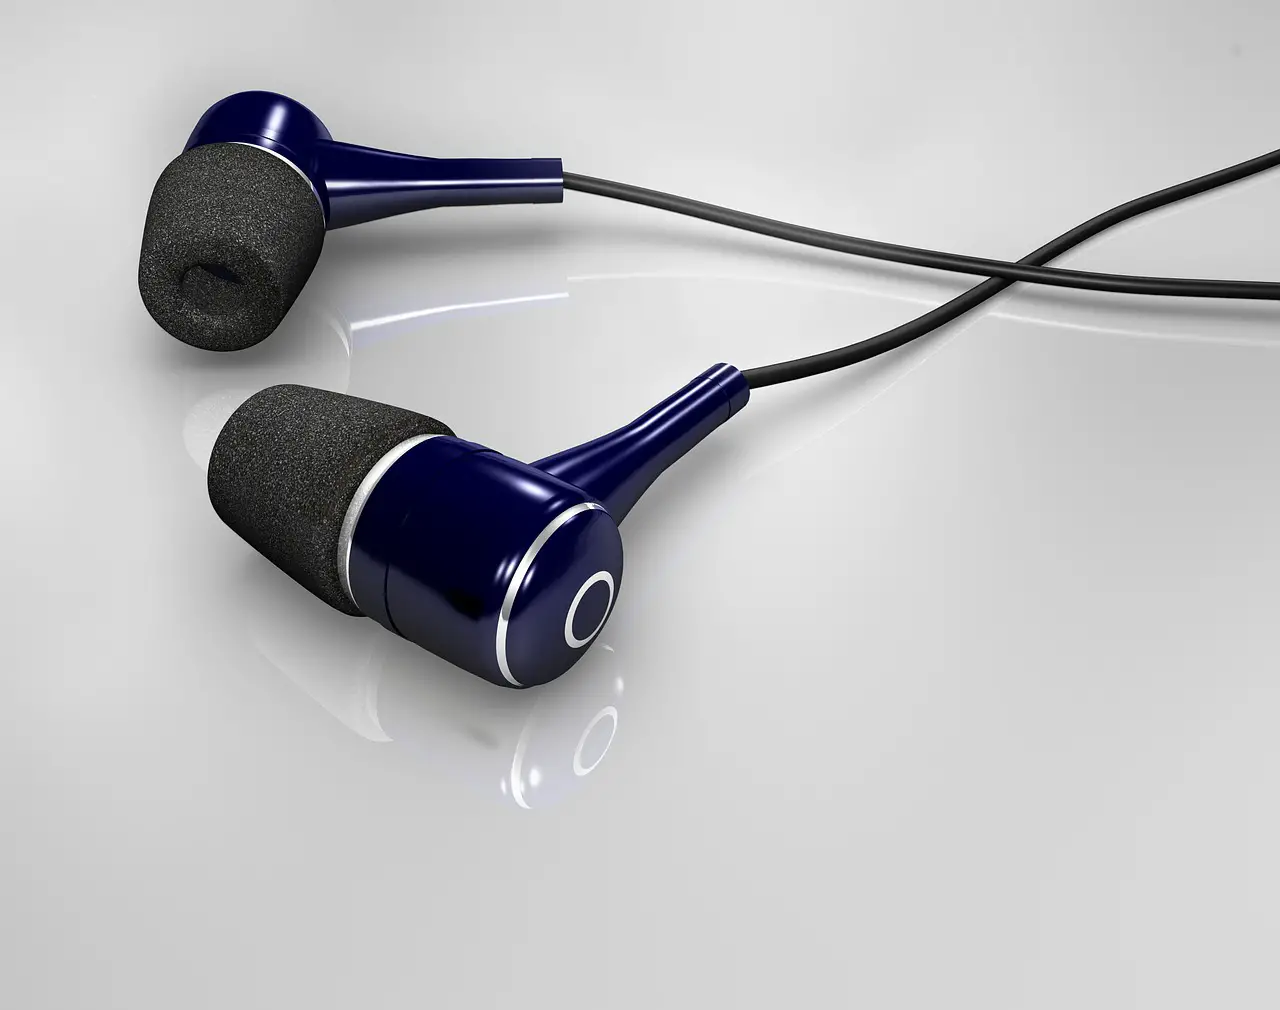 Best Earbuds for Small Ears